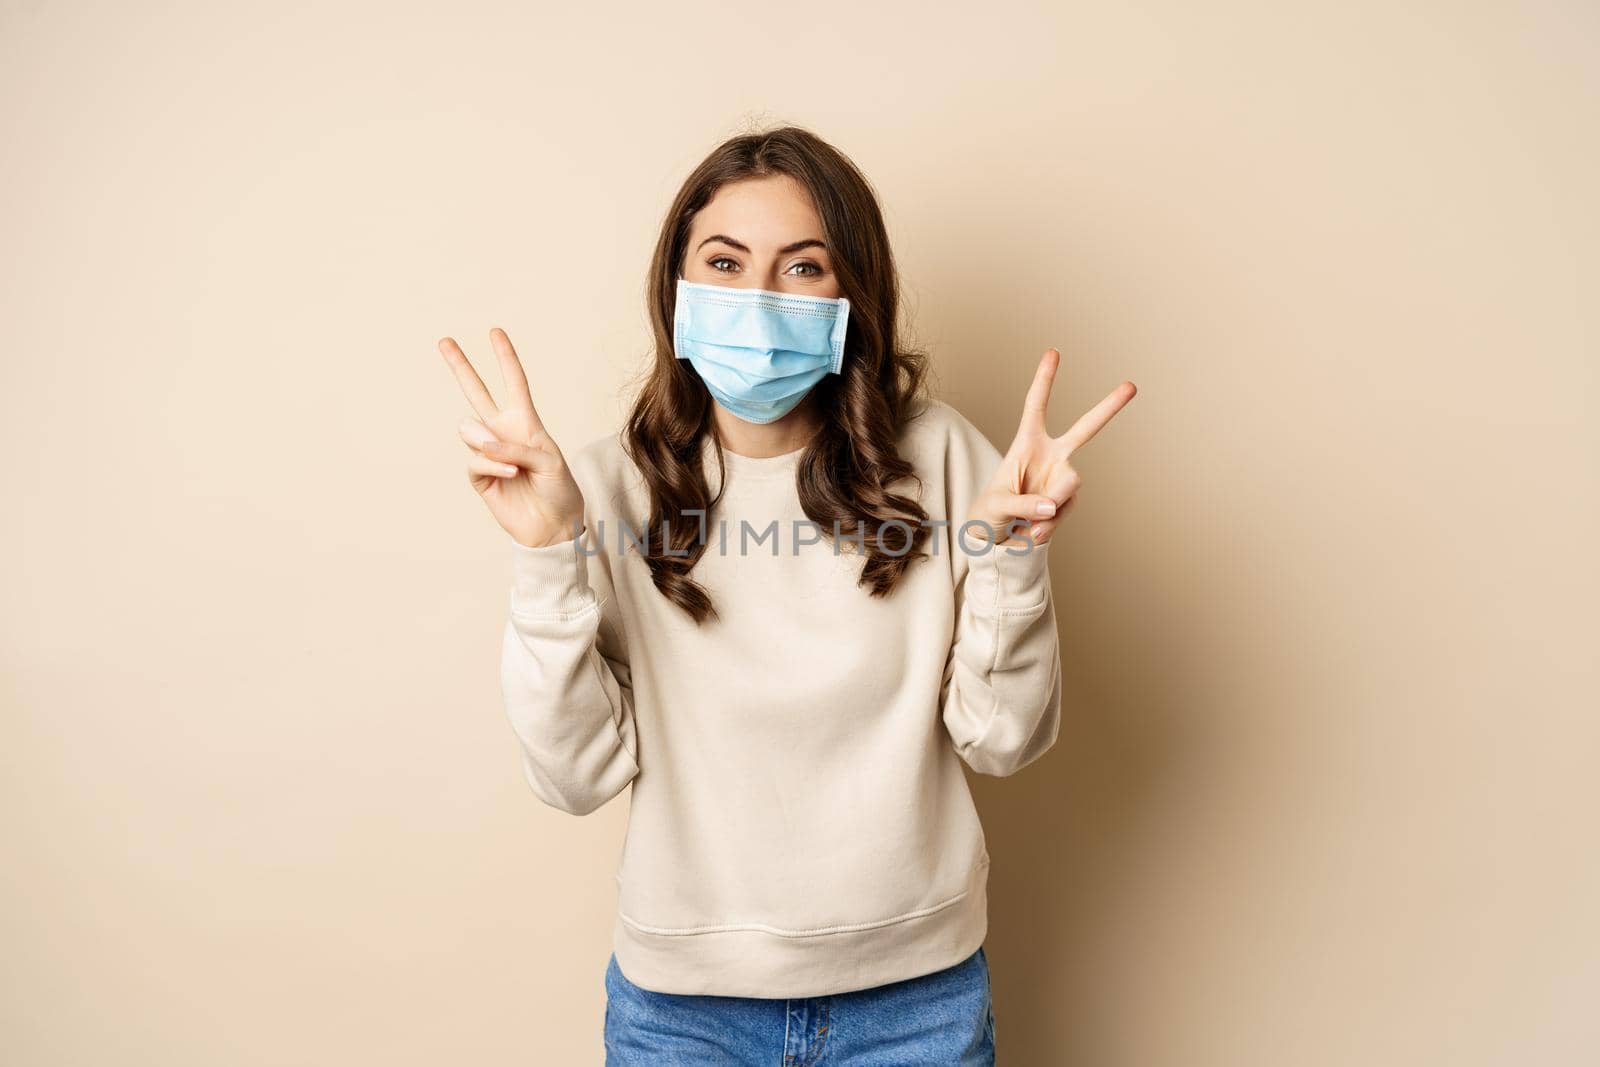 Covid-19, pandemic and quarantine concept. Beautiful adult woman in face medical mask, showing peace, v-sign gesture, standing over beige background.